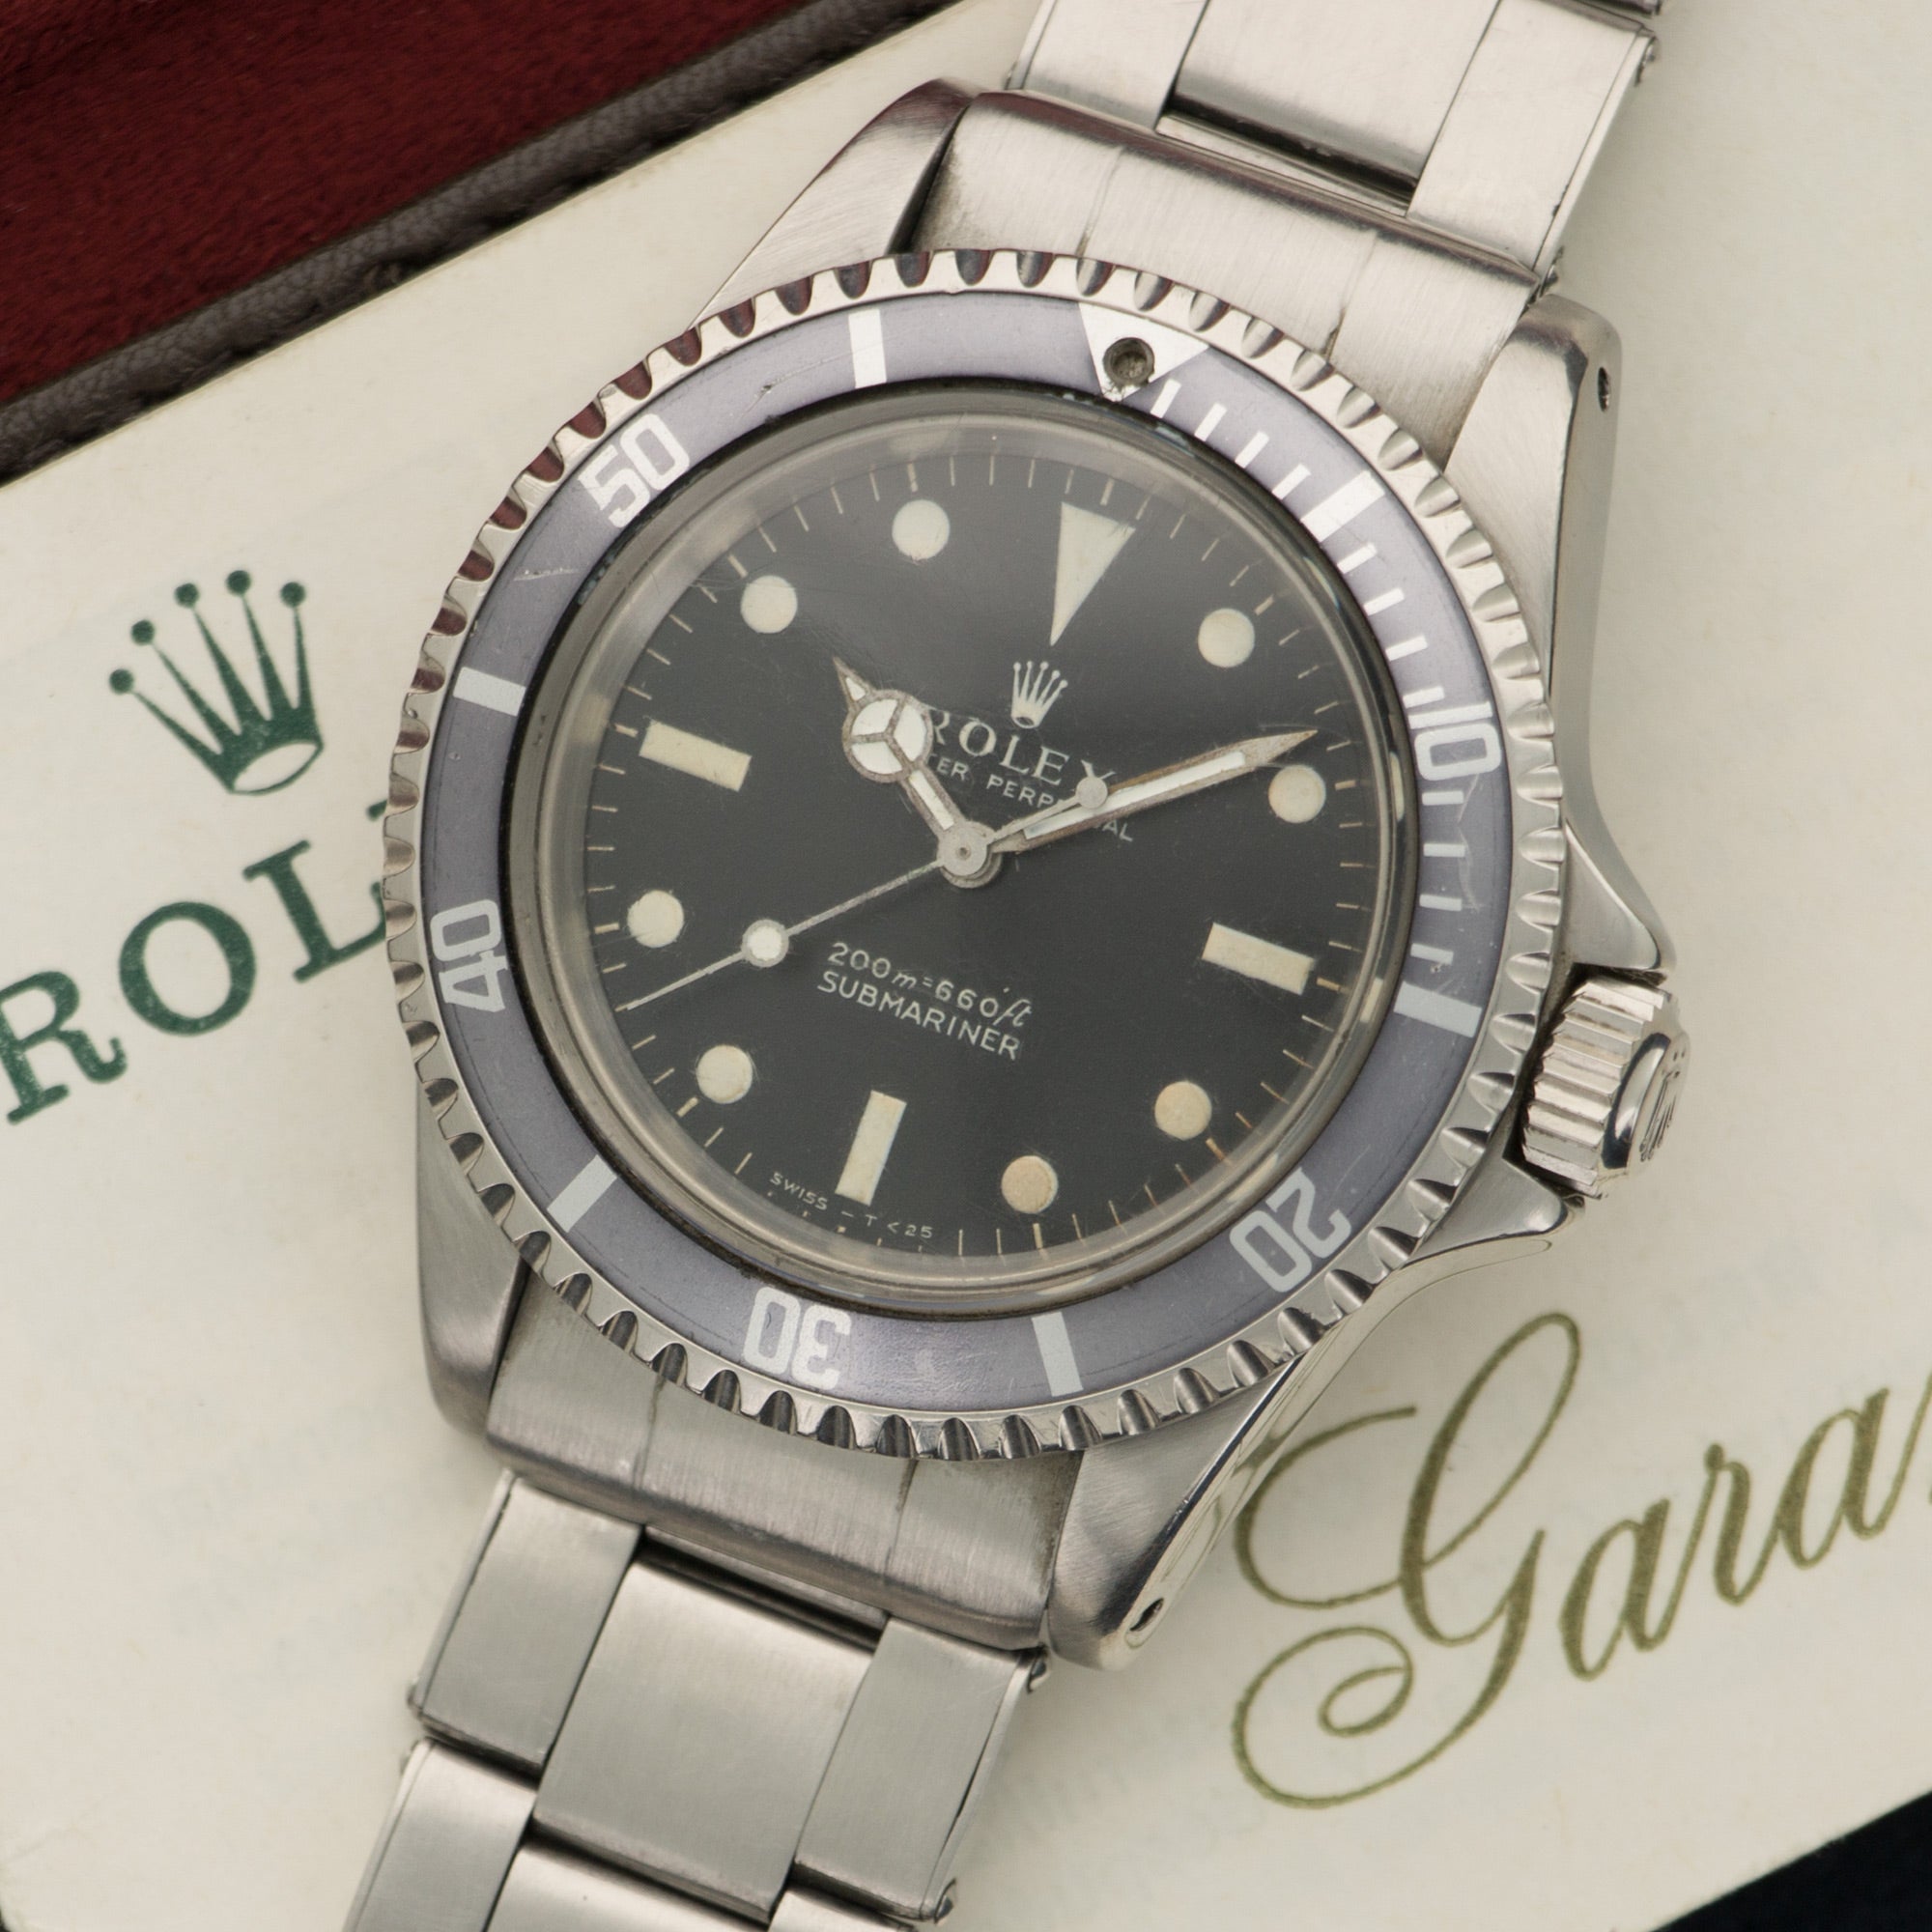 Rolex - Rolex Steel Meters-First Submariner Watch Ref. 5513 with Original Papers - The Keystone Watches